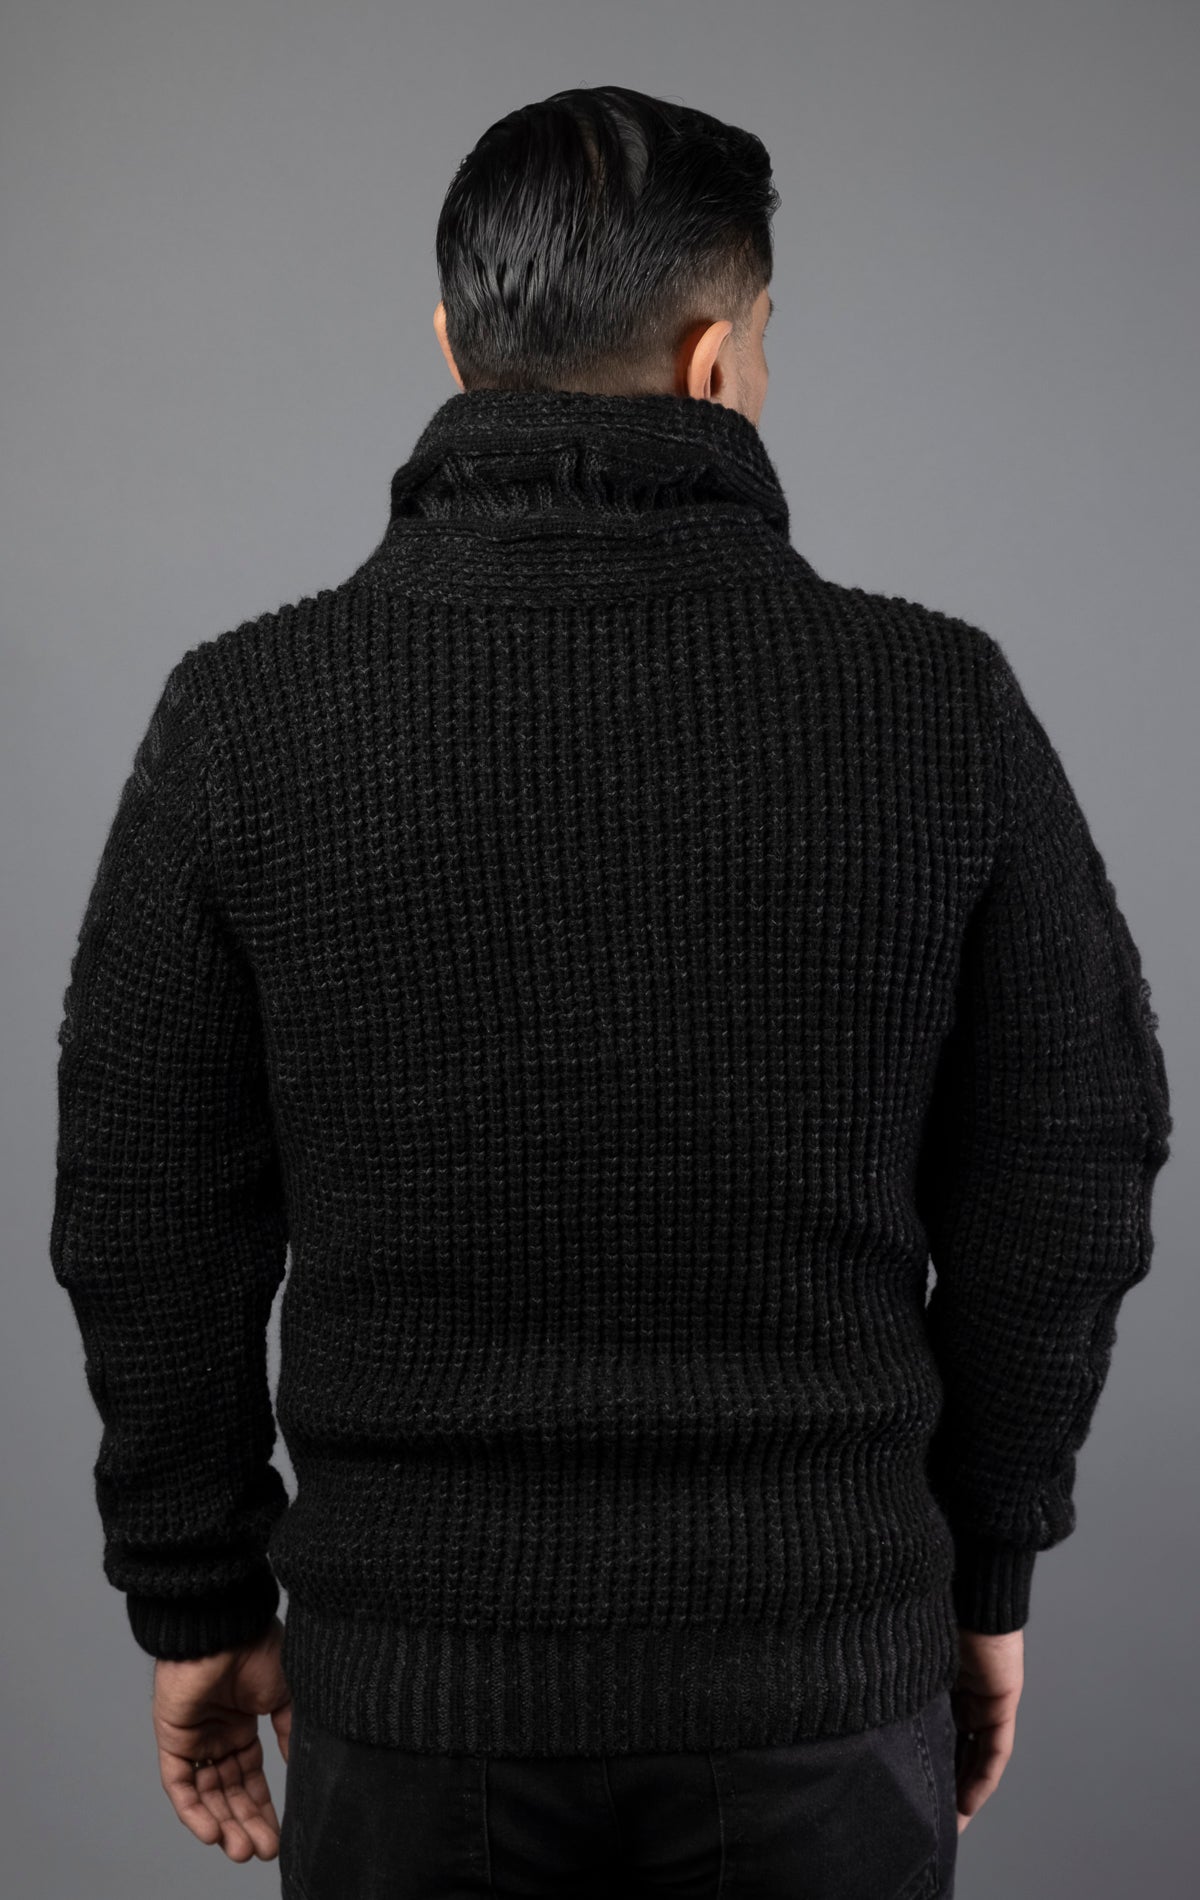 Man wearing heavy-weight, high quality sweater in black color. Designed with a slightly slim fit